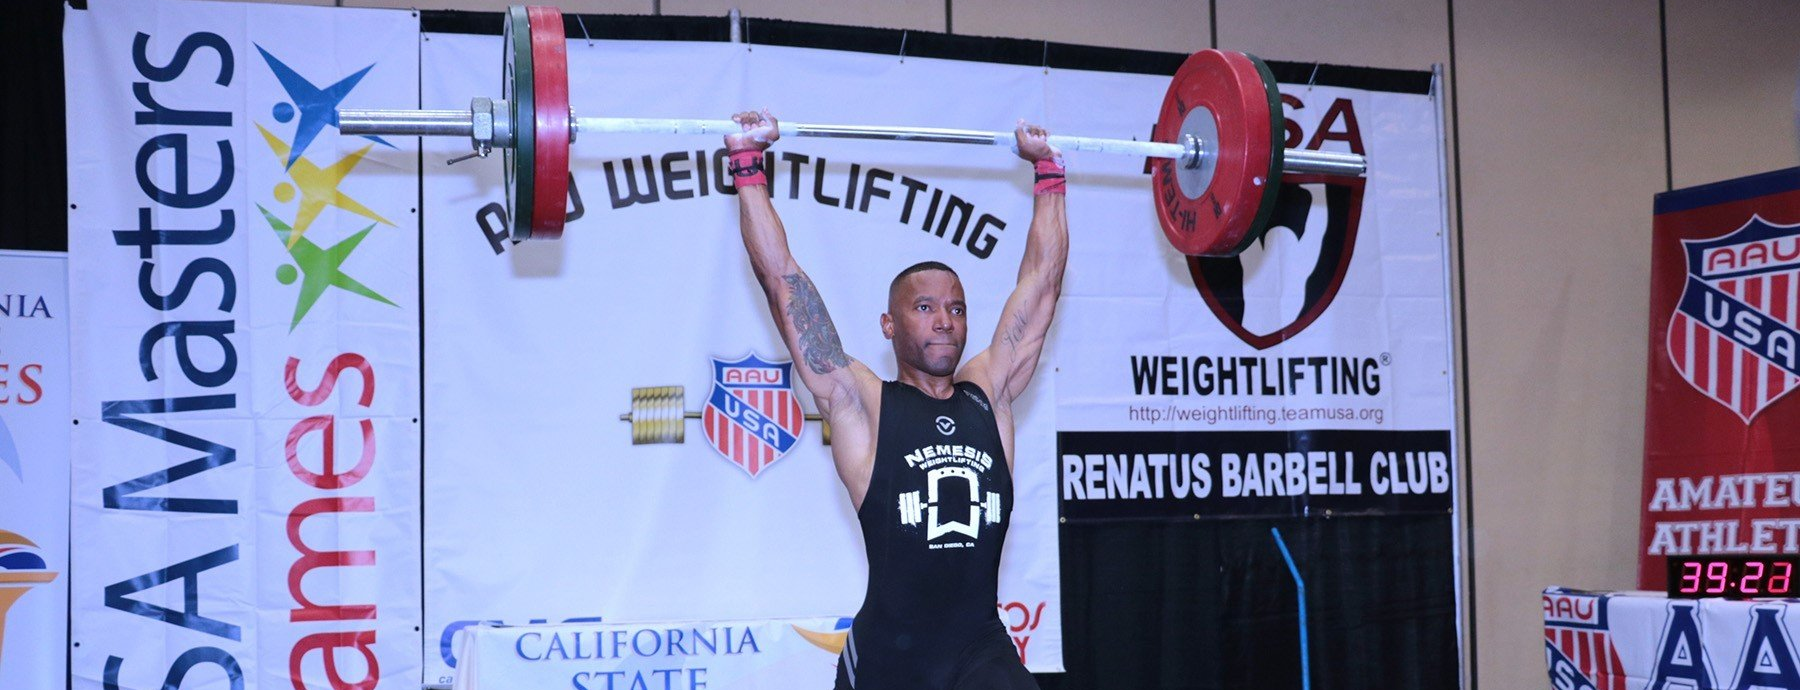 Young Man Weightlifting